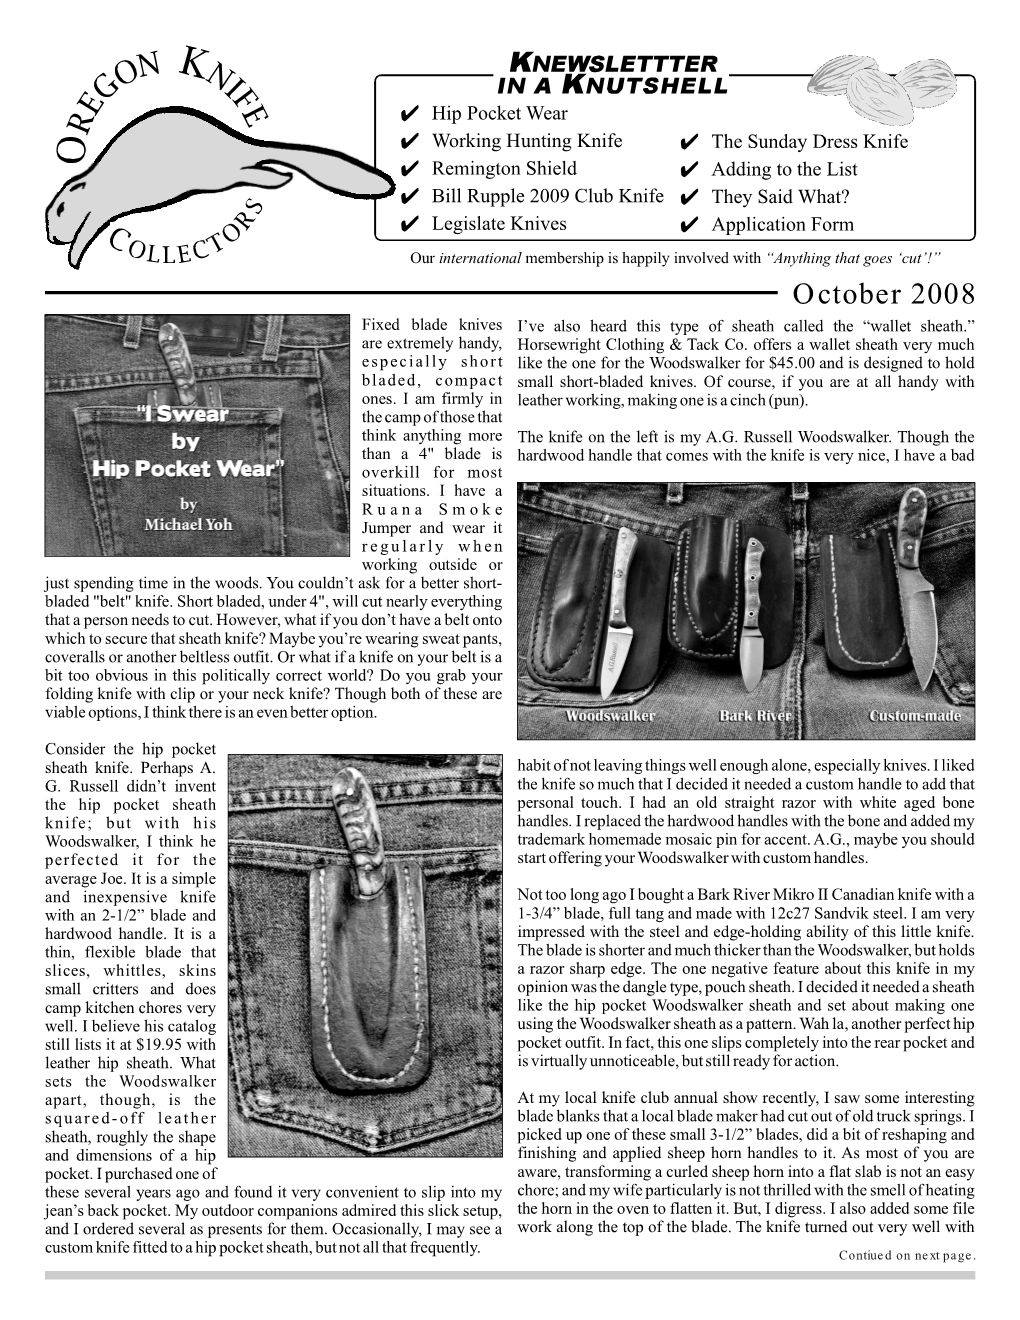 October 2008 Fixed Blade Knives I’Ve Also Heard This Type of Sheath Called the “Wallet Sheath.” Are Extremely Handy, Horsewright Clothing & Tack Co